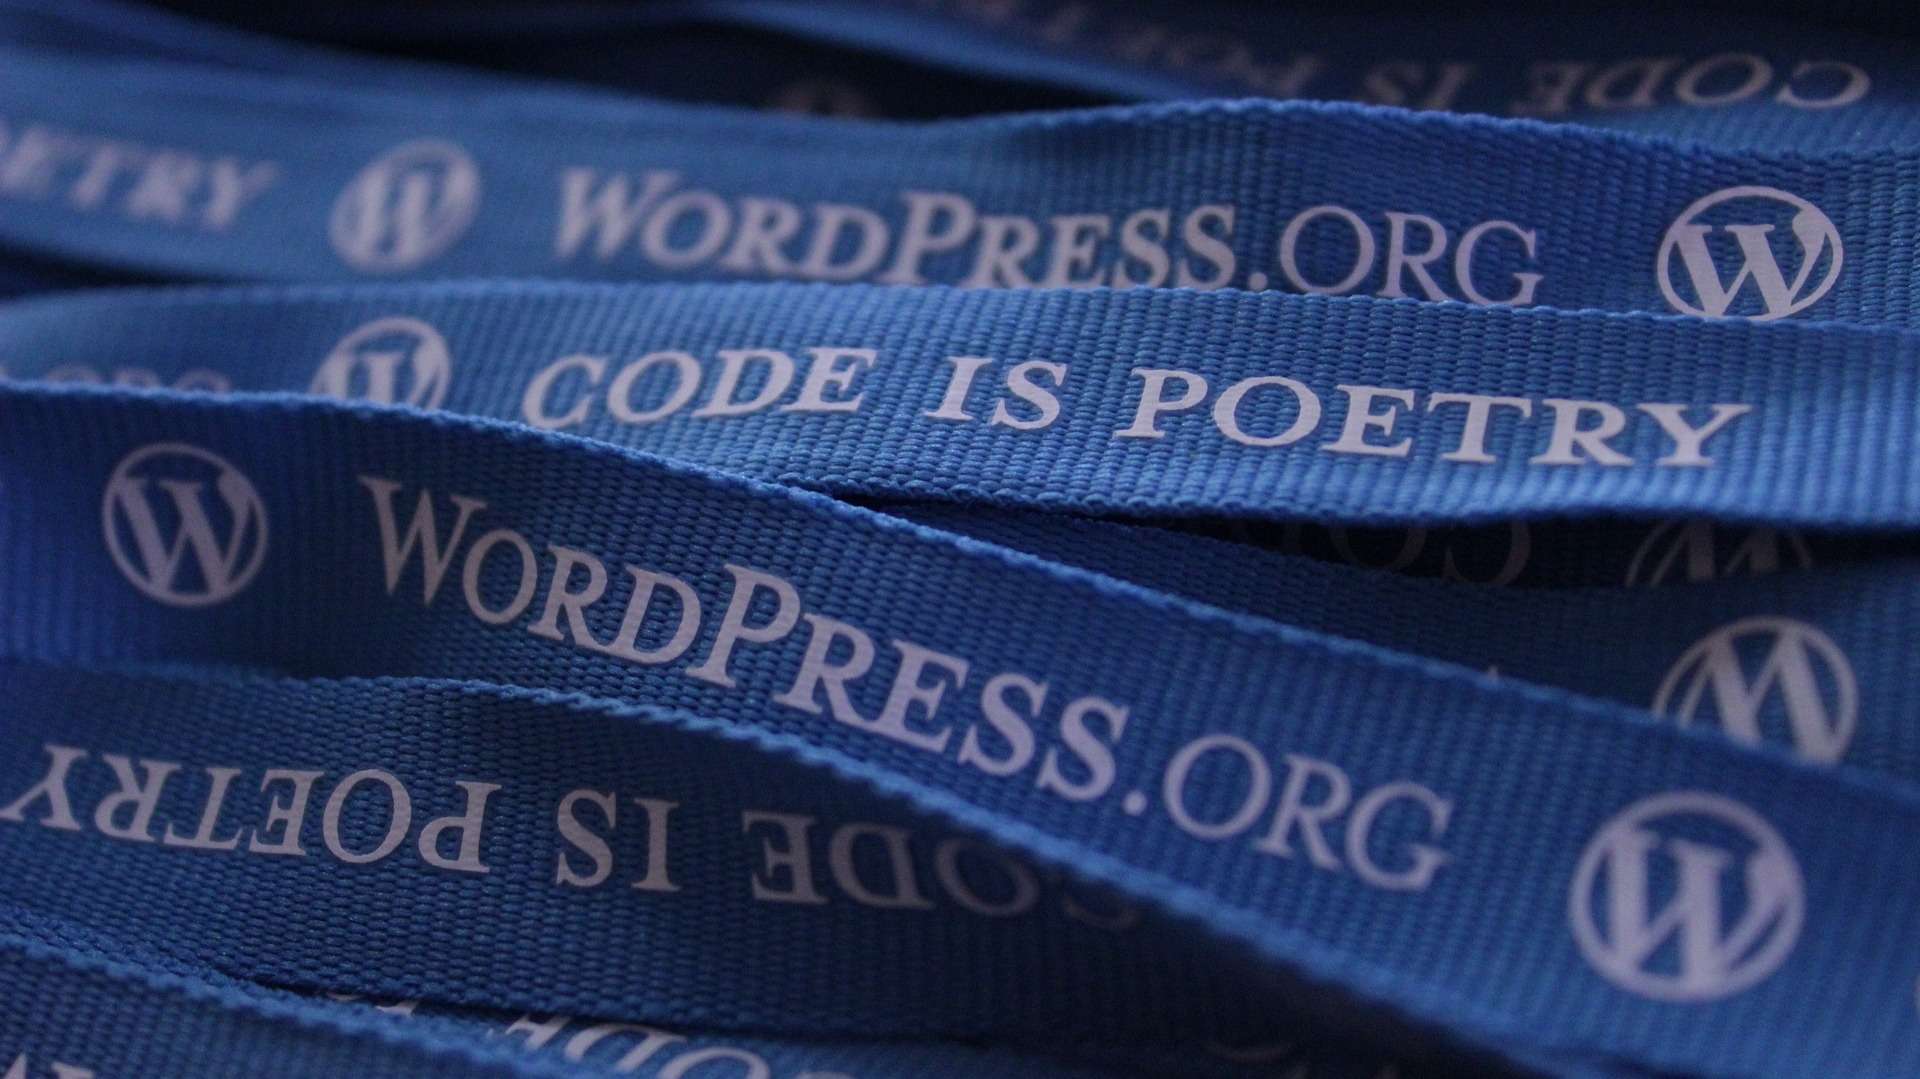 WordPress lanyards with label Code is Poetry